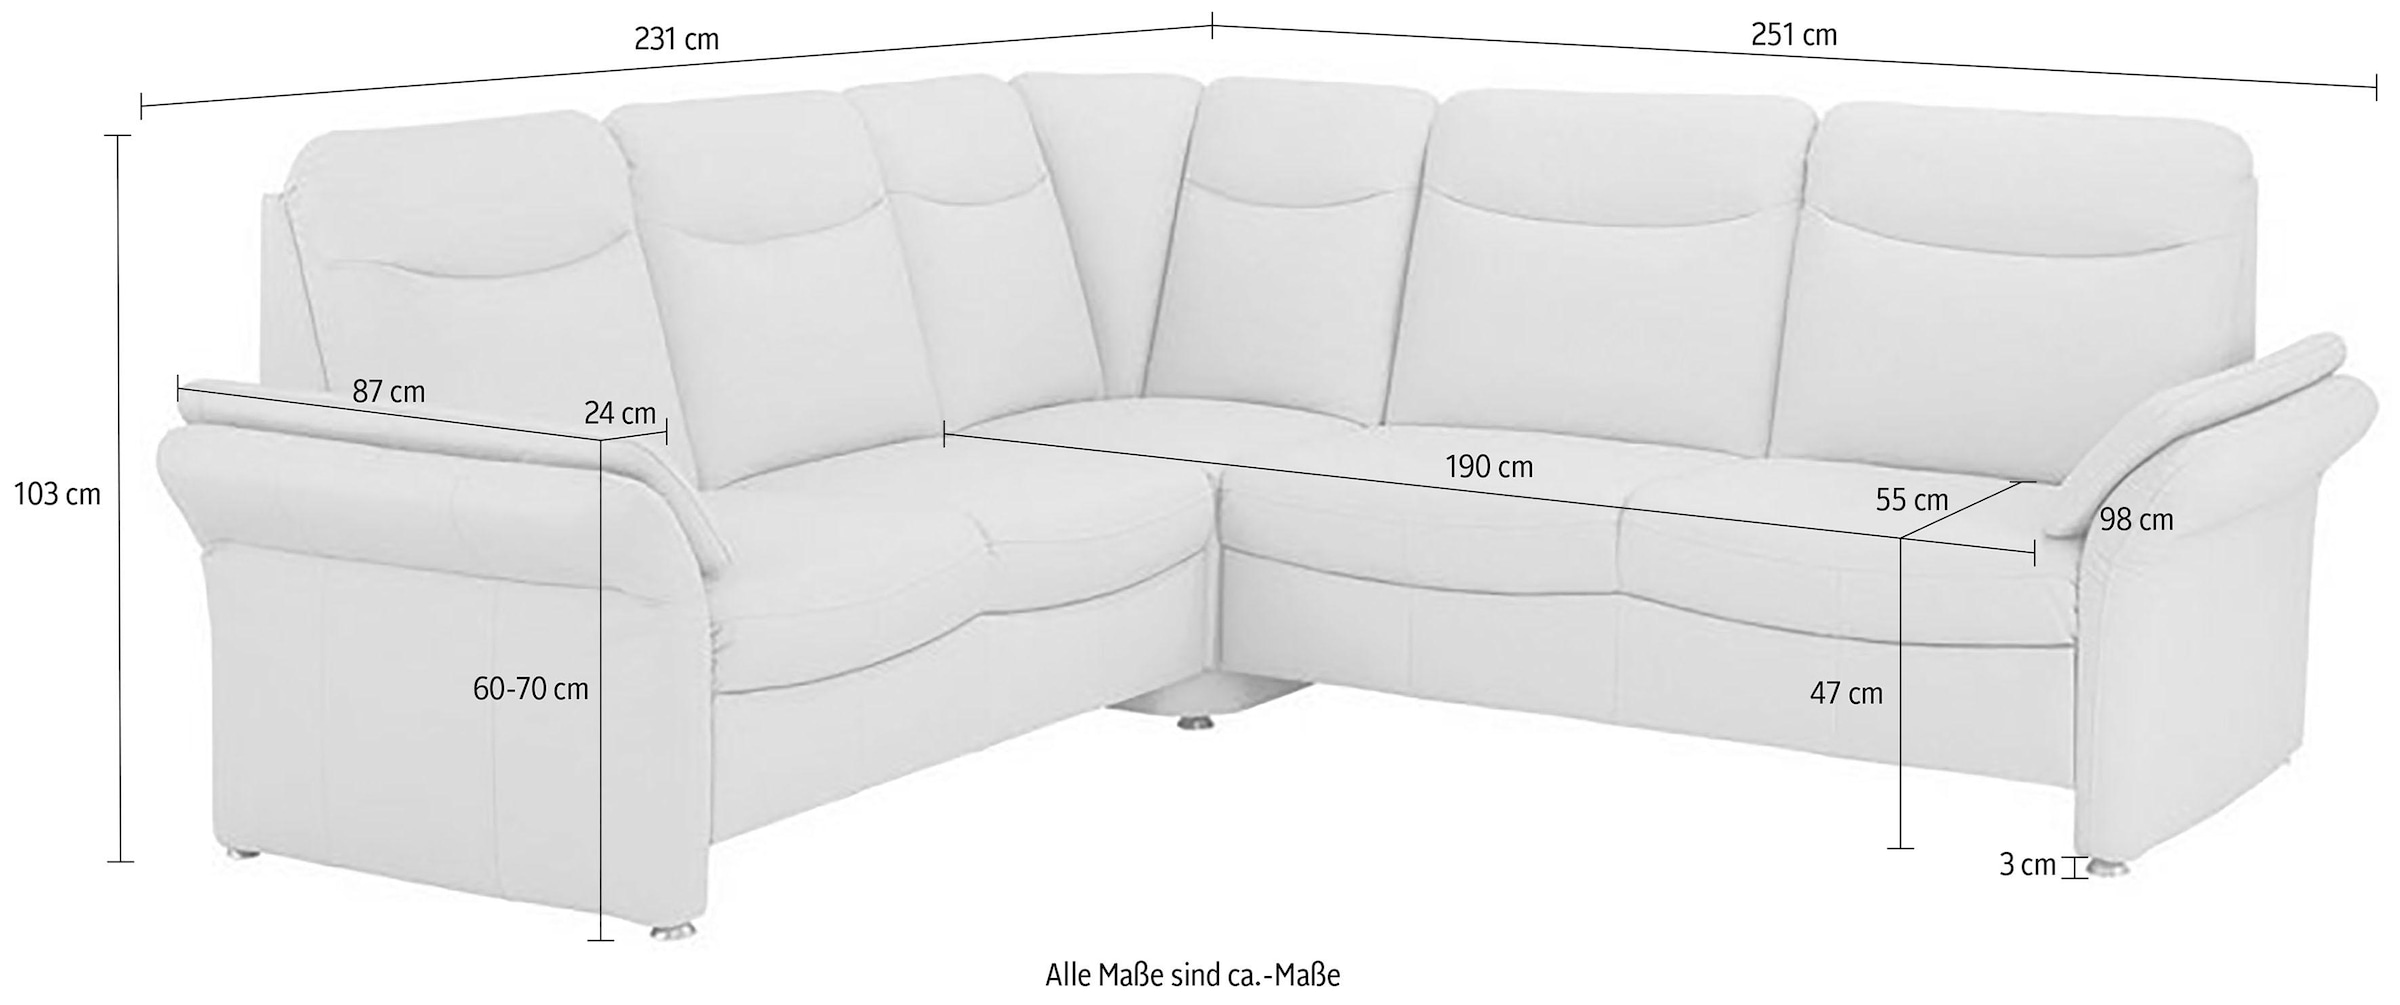 Home affaire Ecksofa »Tahoma L-Form«, mit Armlehnfunktion, wahlweise Bettfunktion, Schublade, Relaxfunktion